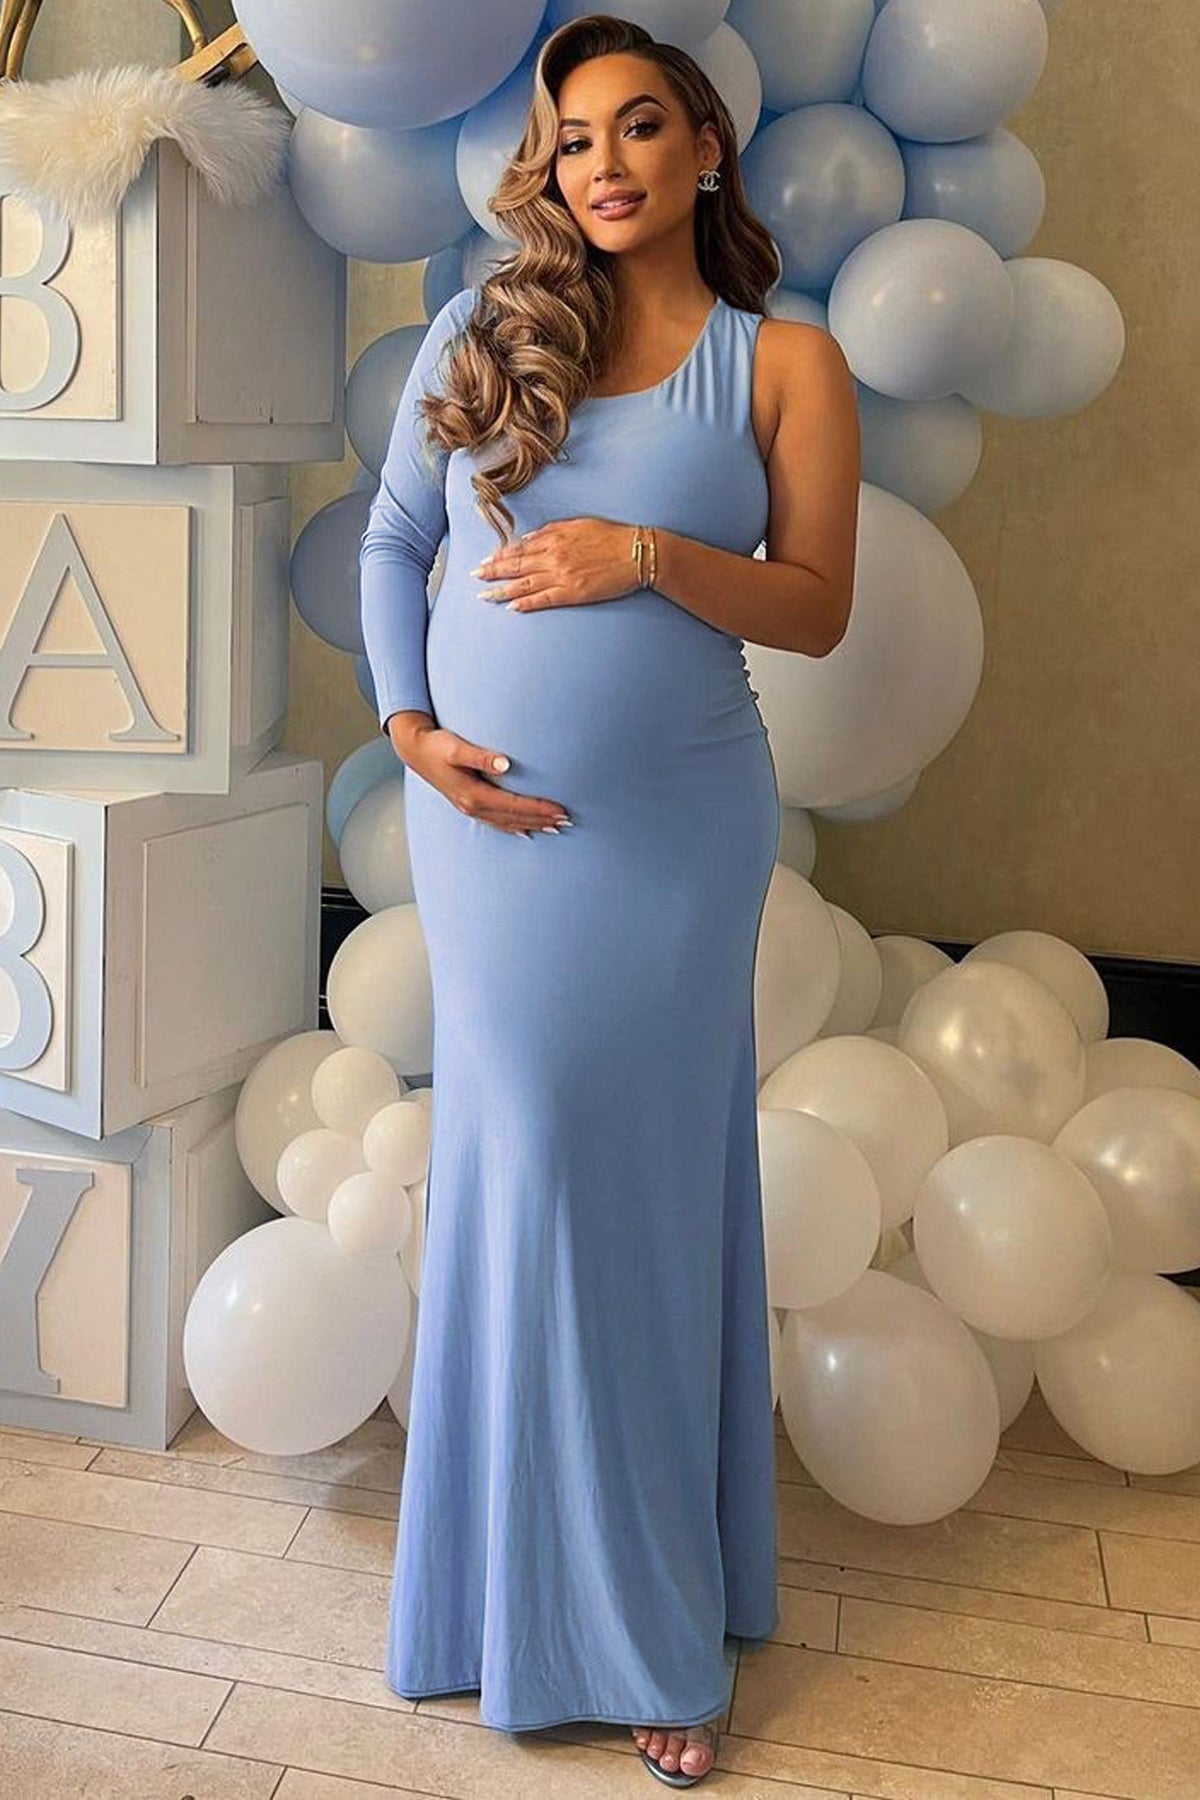 Baby Shower Maternity Styles & Outfits – Club L London - USA